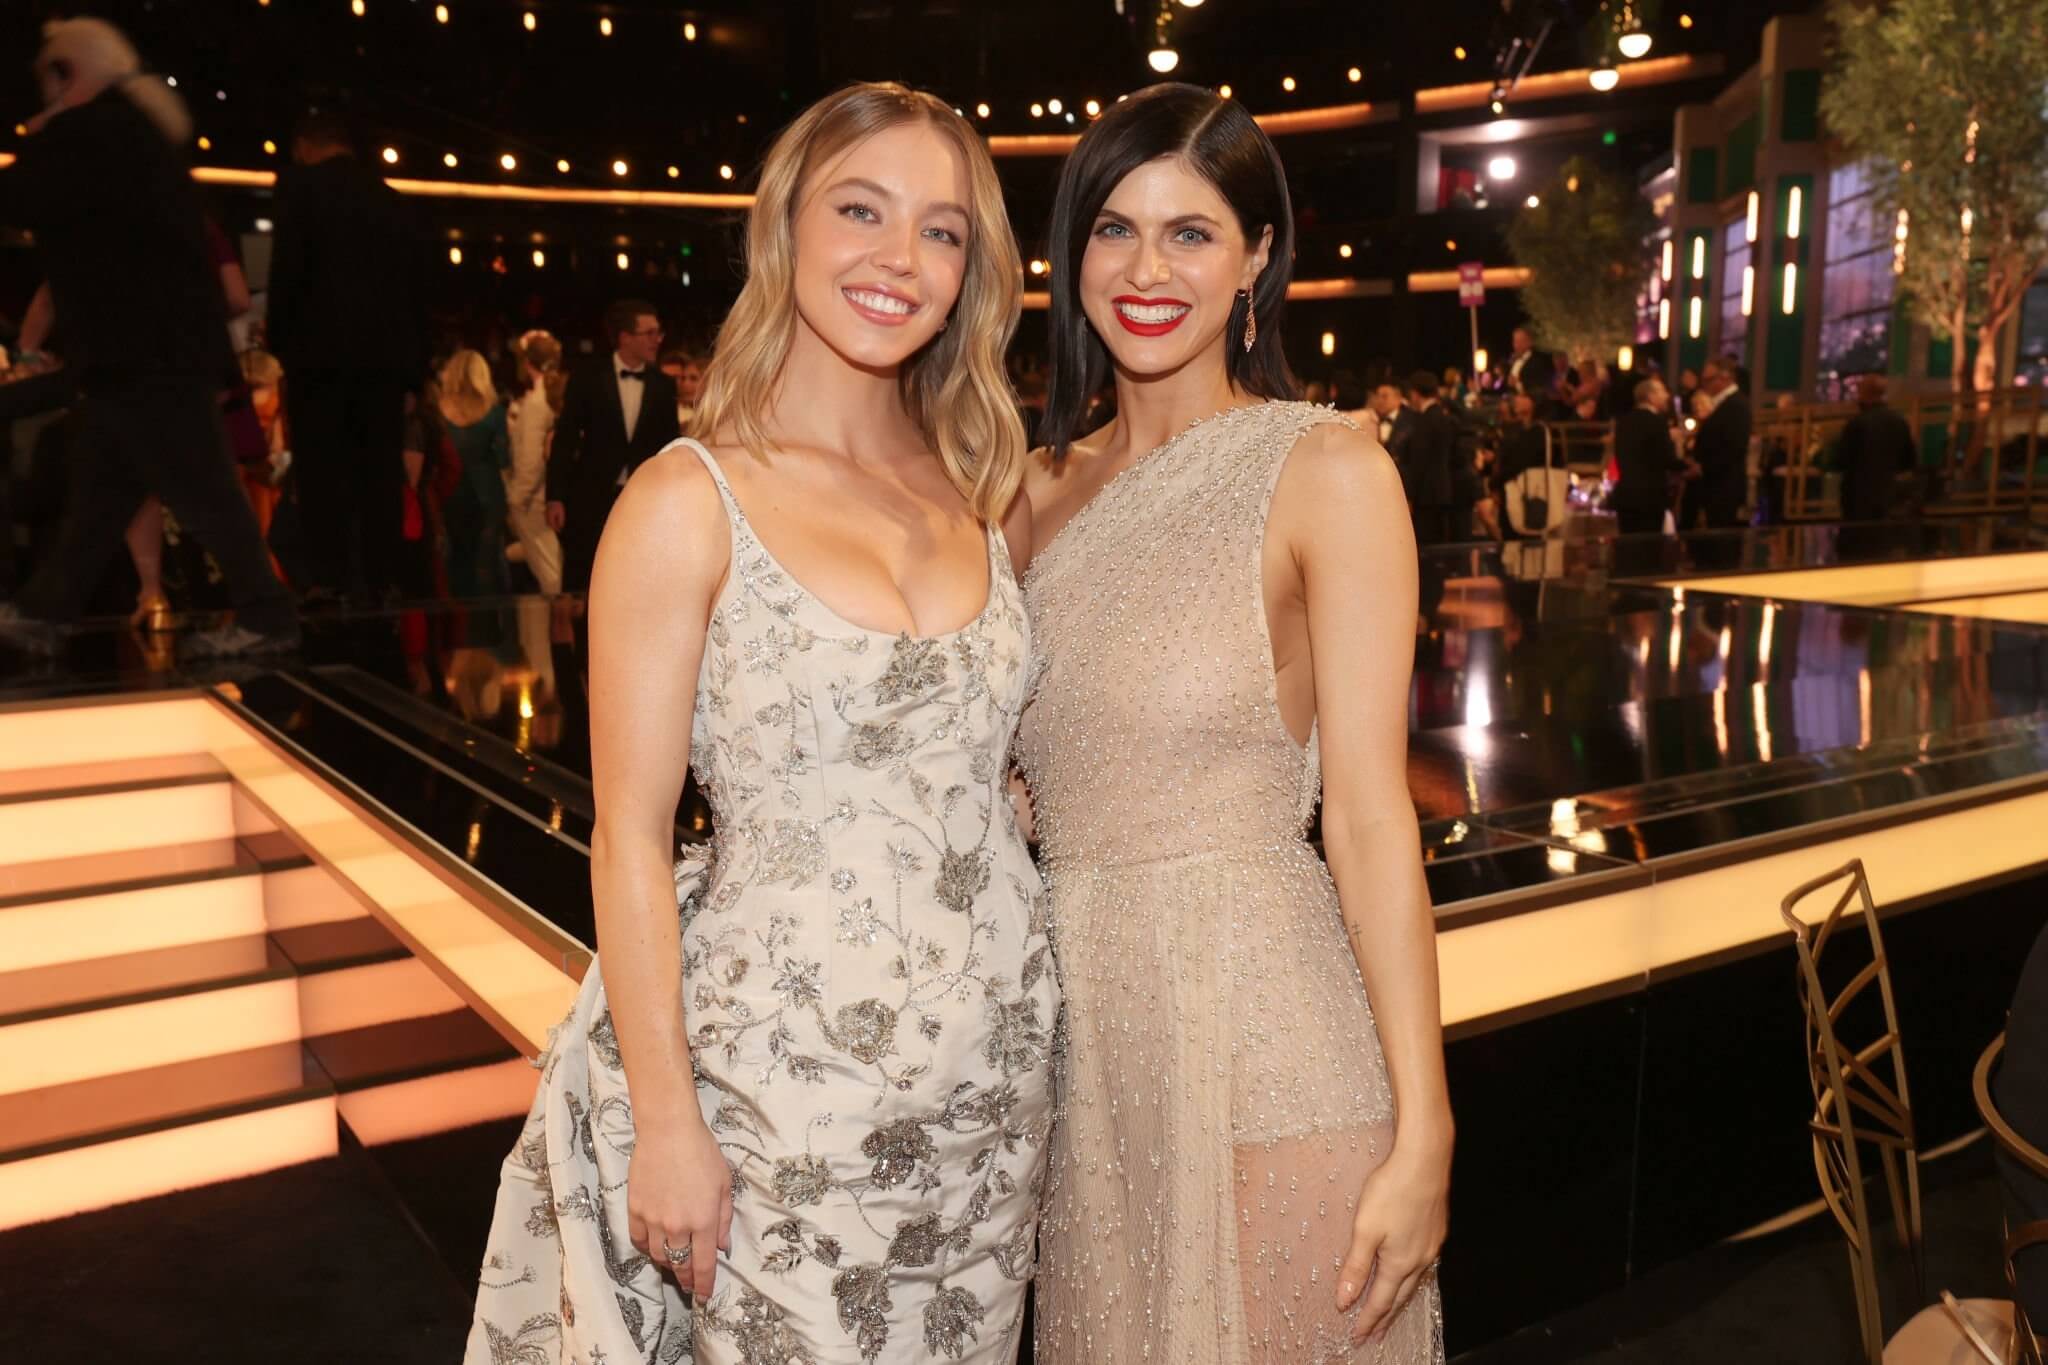 Sydney Sweeney and Alexandra Daddario attend the 74th Annual Primetime Emmy Awards held at the Microsoft Theater on September 12, 2022.